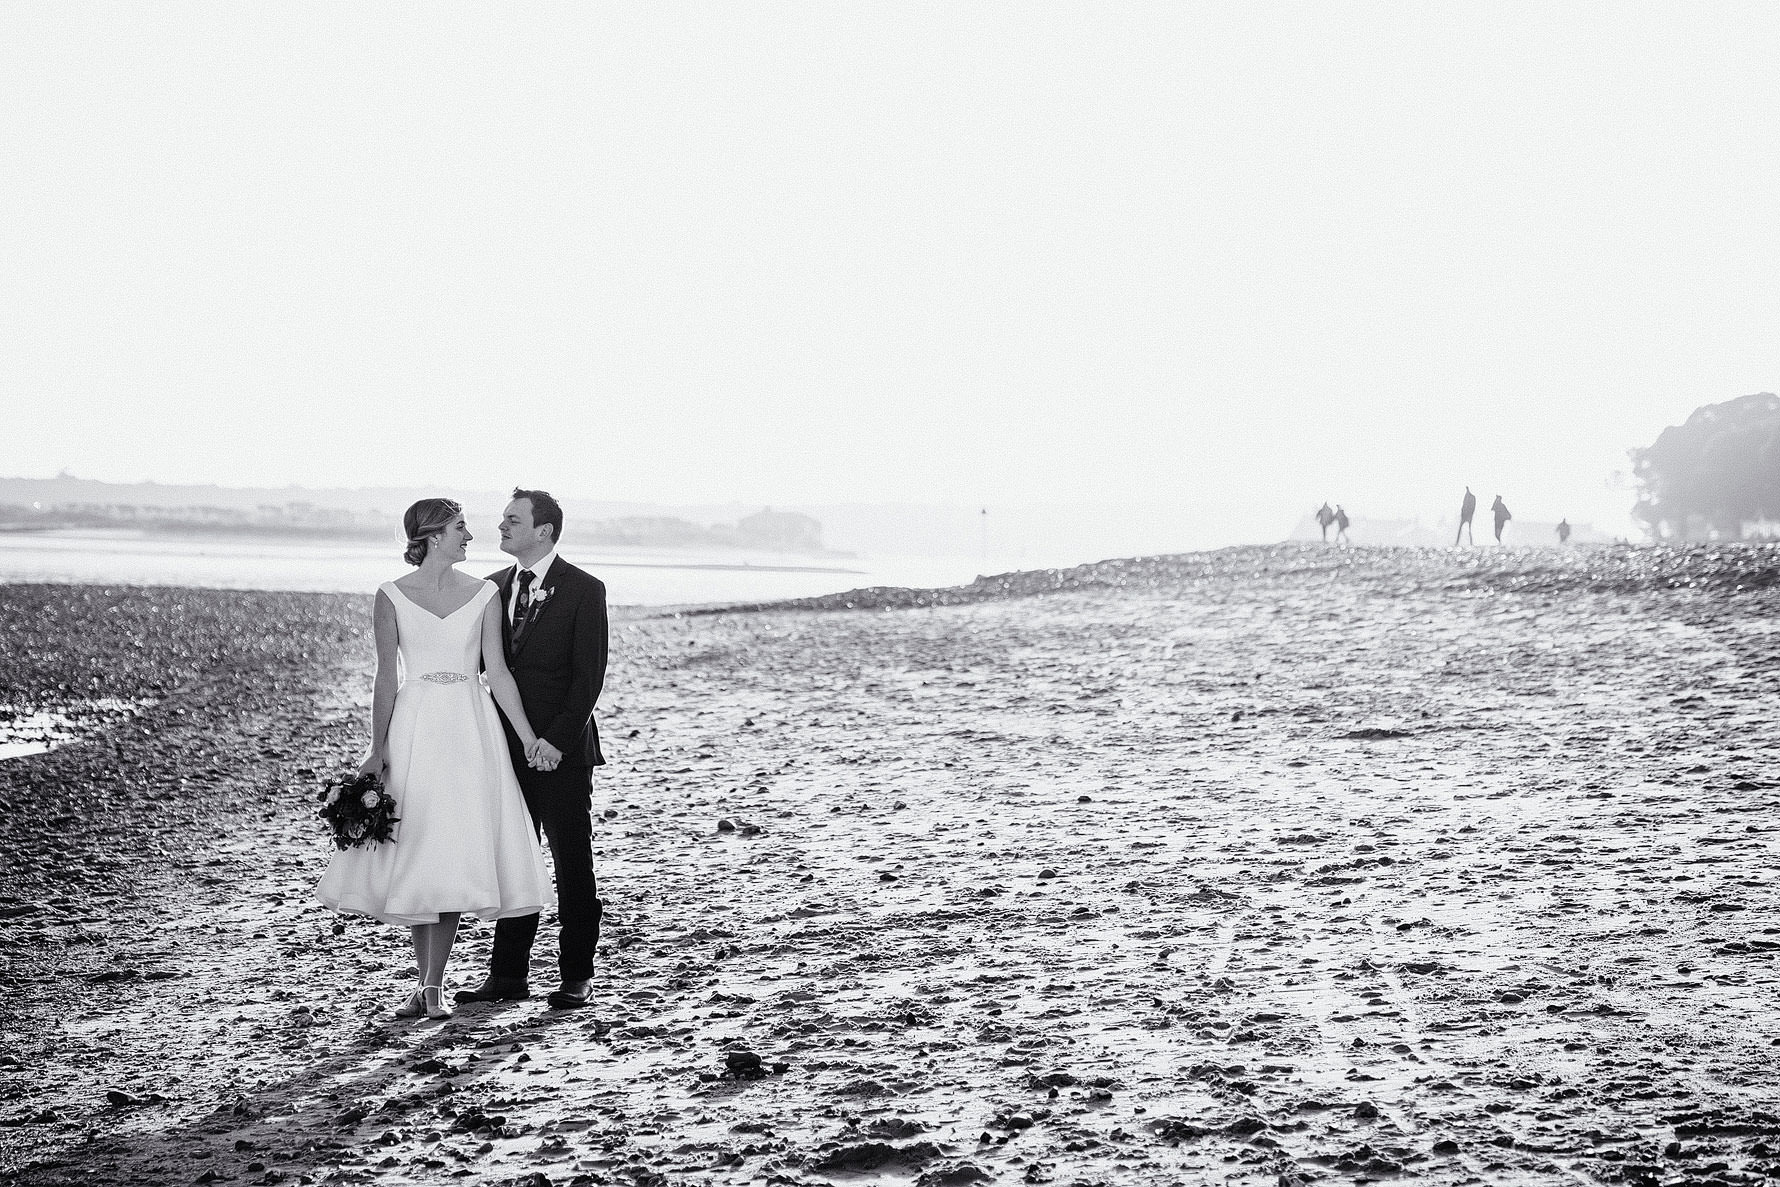 Bournemouth beach wedding photography by Elliot W Patching